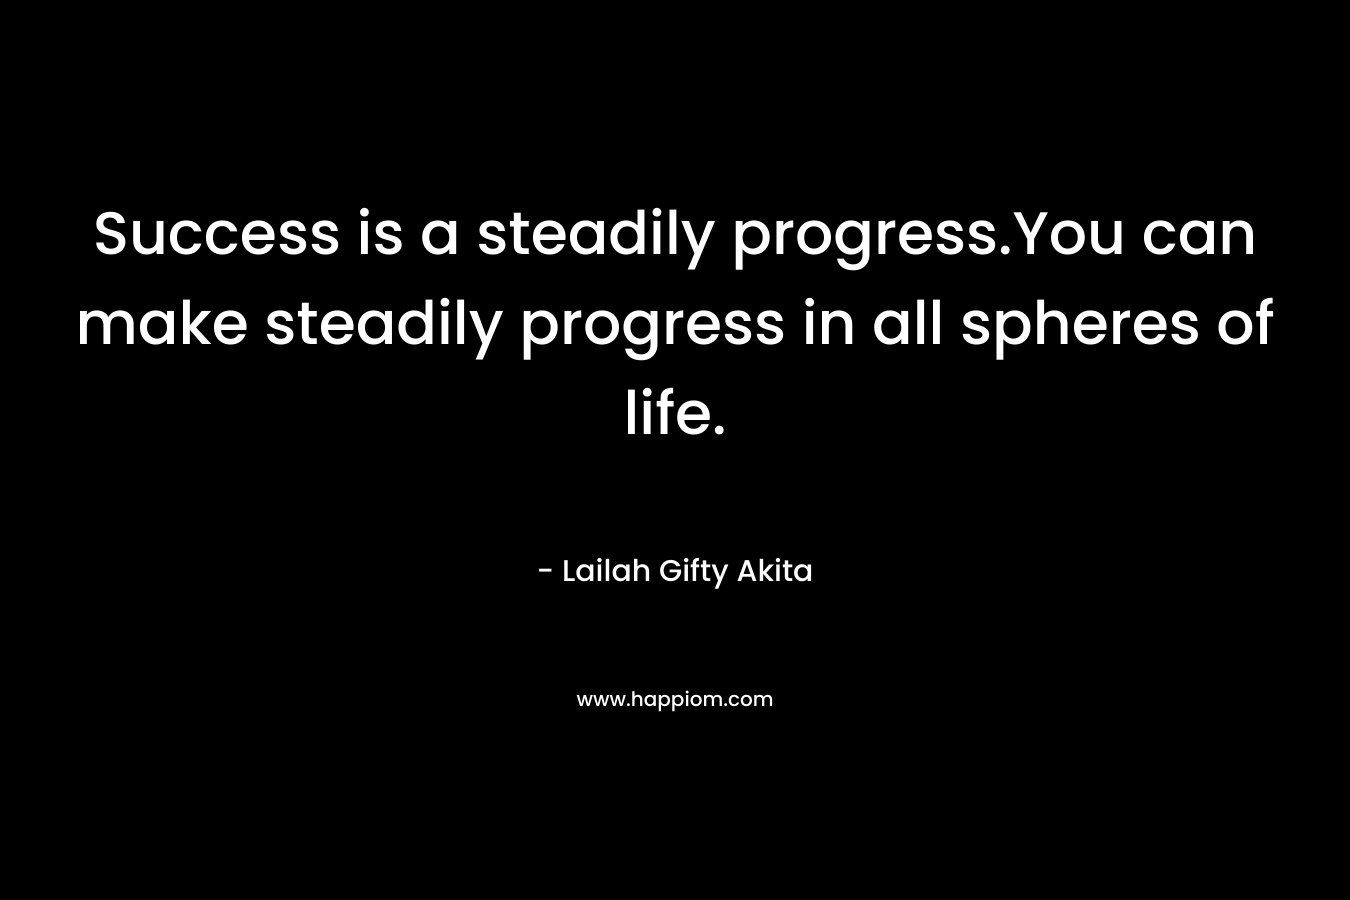 Success is a steadily progress.You can make steadily progress in all spheres of life.